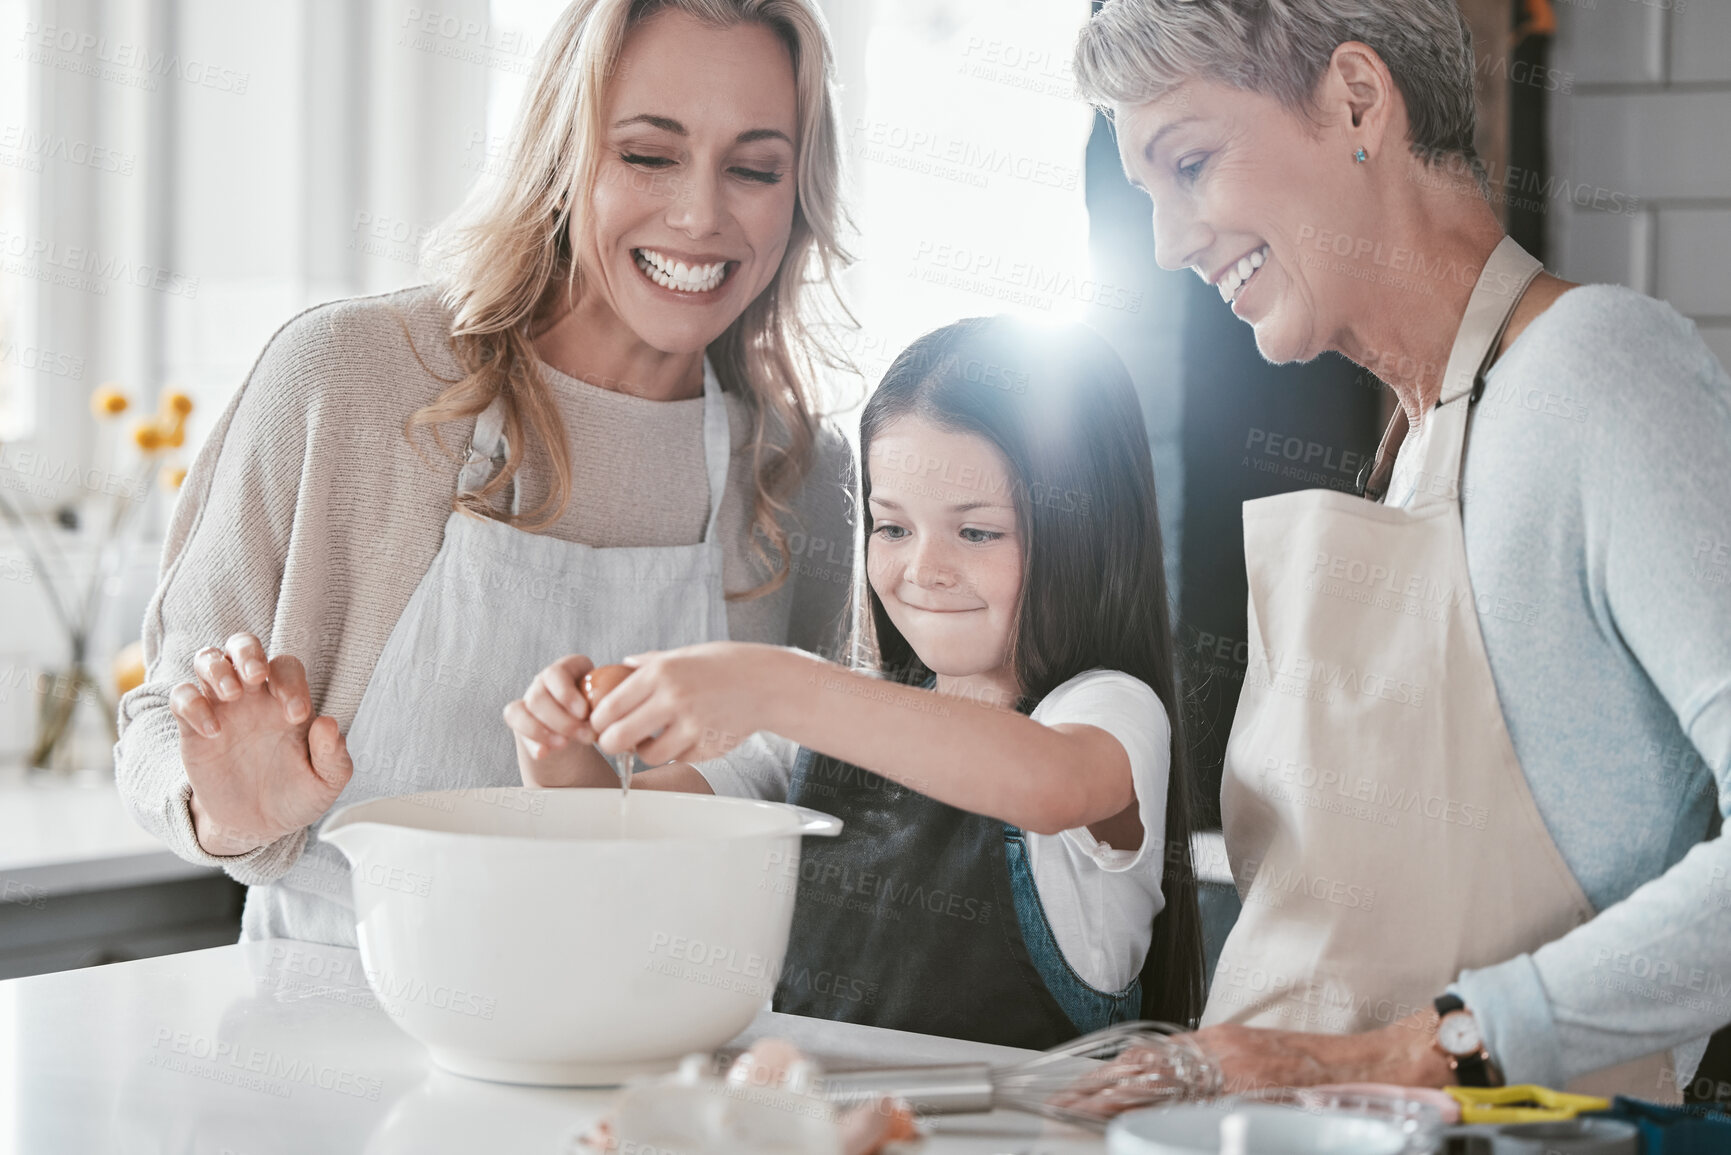 Buy stock photo Baking, excited and girl with mother and grandmother in the kitchen cooking as a team. Food, teamwork and child with mom and senior woman learning to crack an egg while helping with dinner in a house